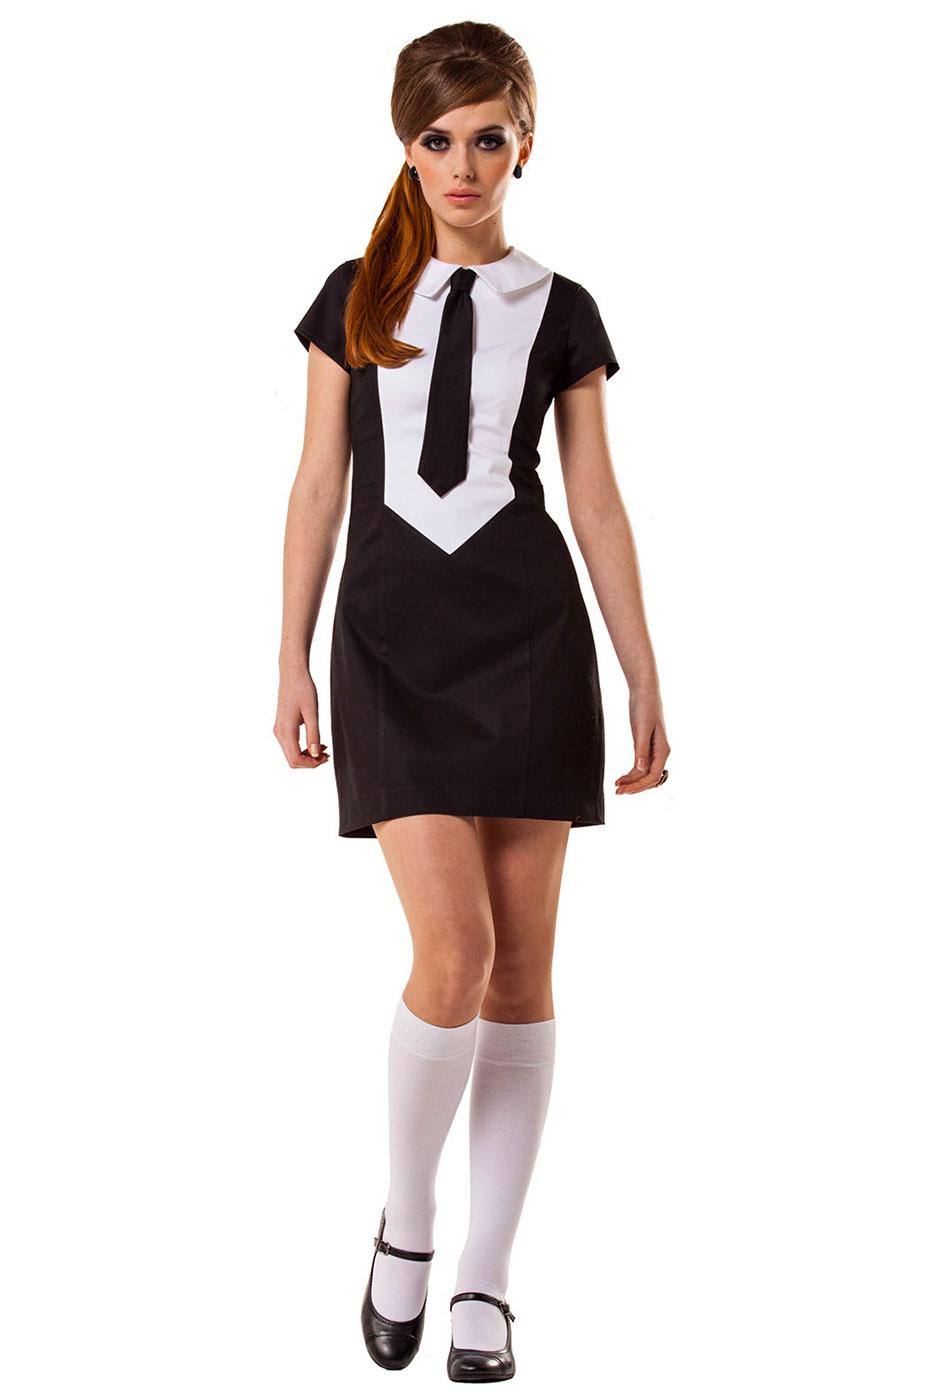 MARMALADE Retro 60s Mod Fitted Mini Dress with Collar/Tie